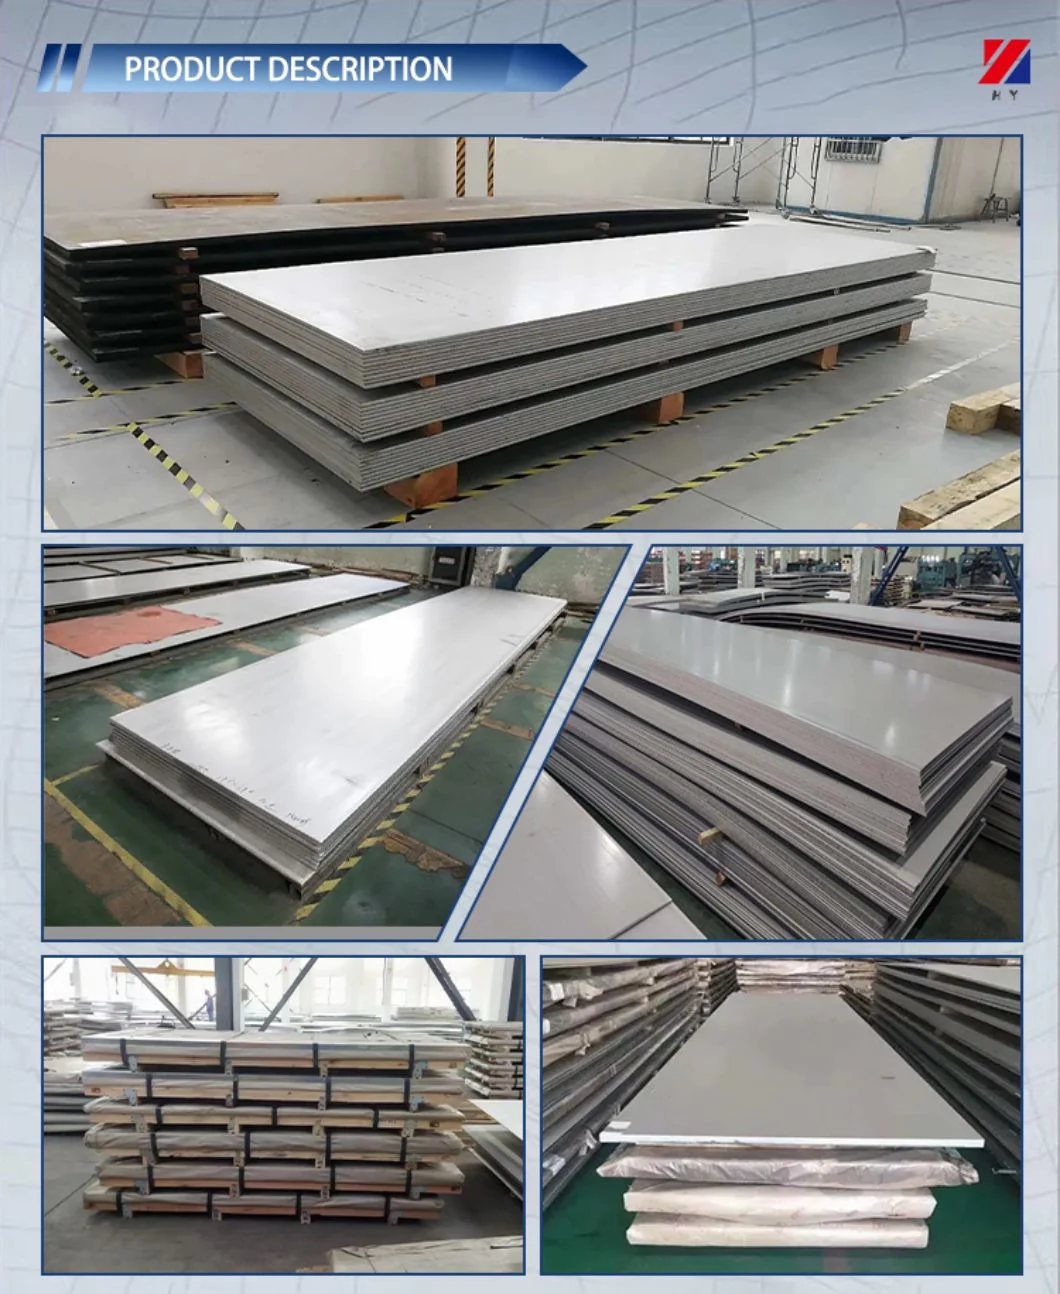 Inconel 690 N06690 Ns3105 2.4642 Monel K-500 N05500 2.4375 Inconel X-750 N07750 Gh4145 Steel Plate and Sheet Stainless Steel 904 Inconel Alloy Sheet